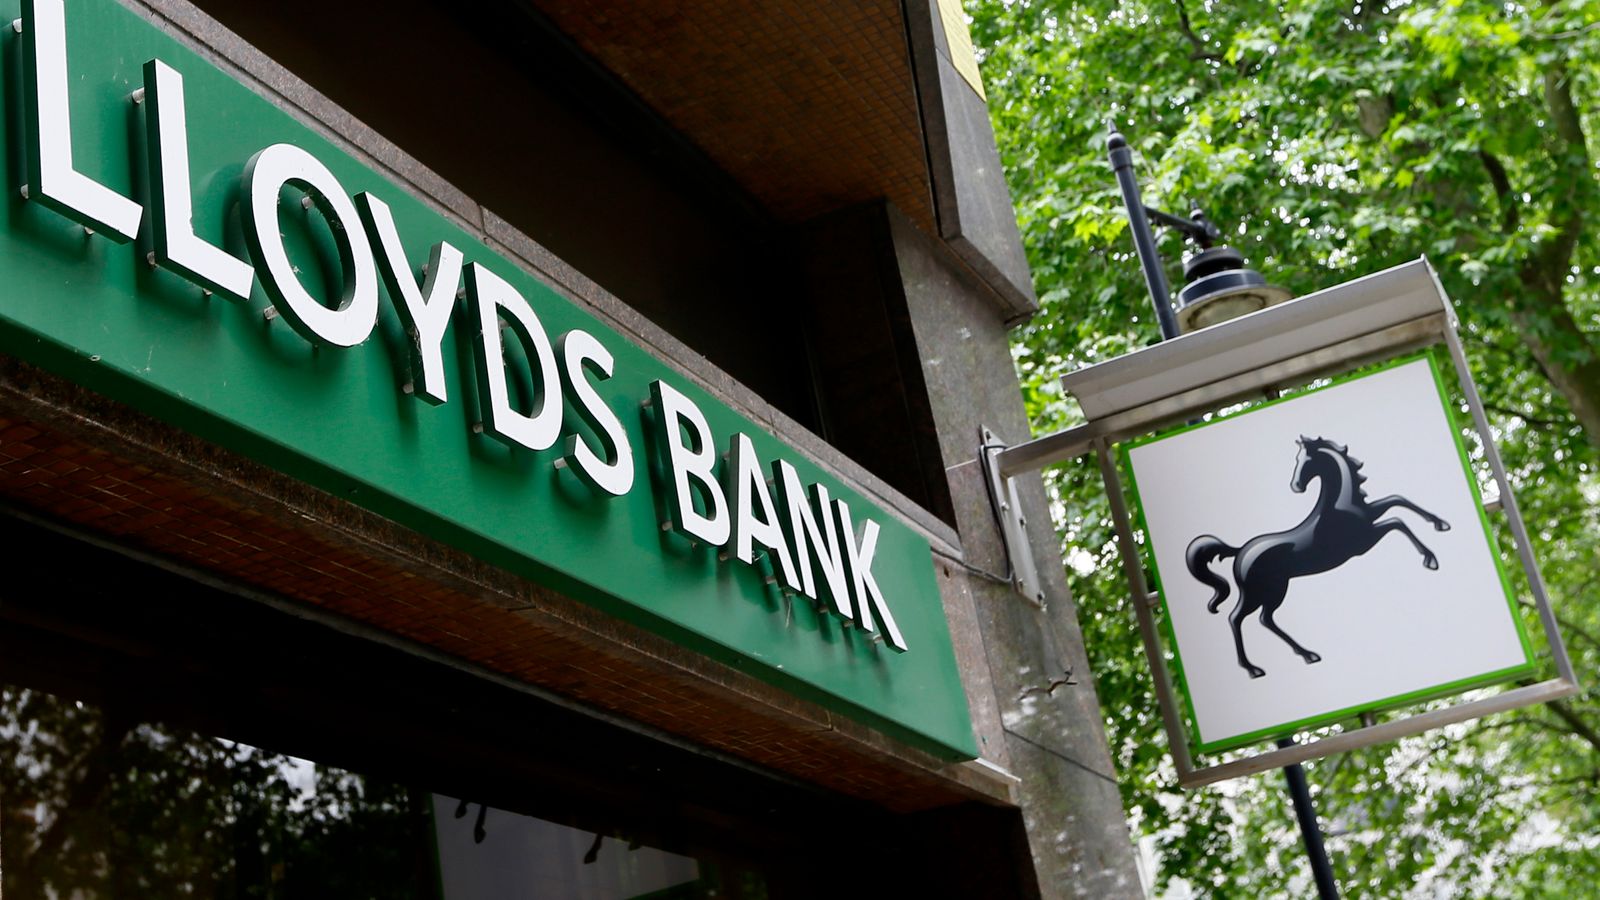 Barclays and Lloyds among bank branches announcing closures